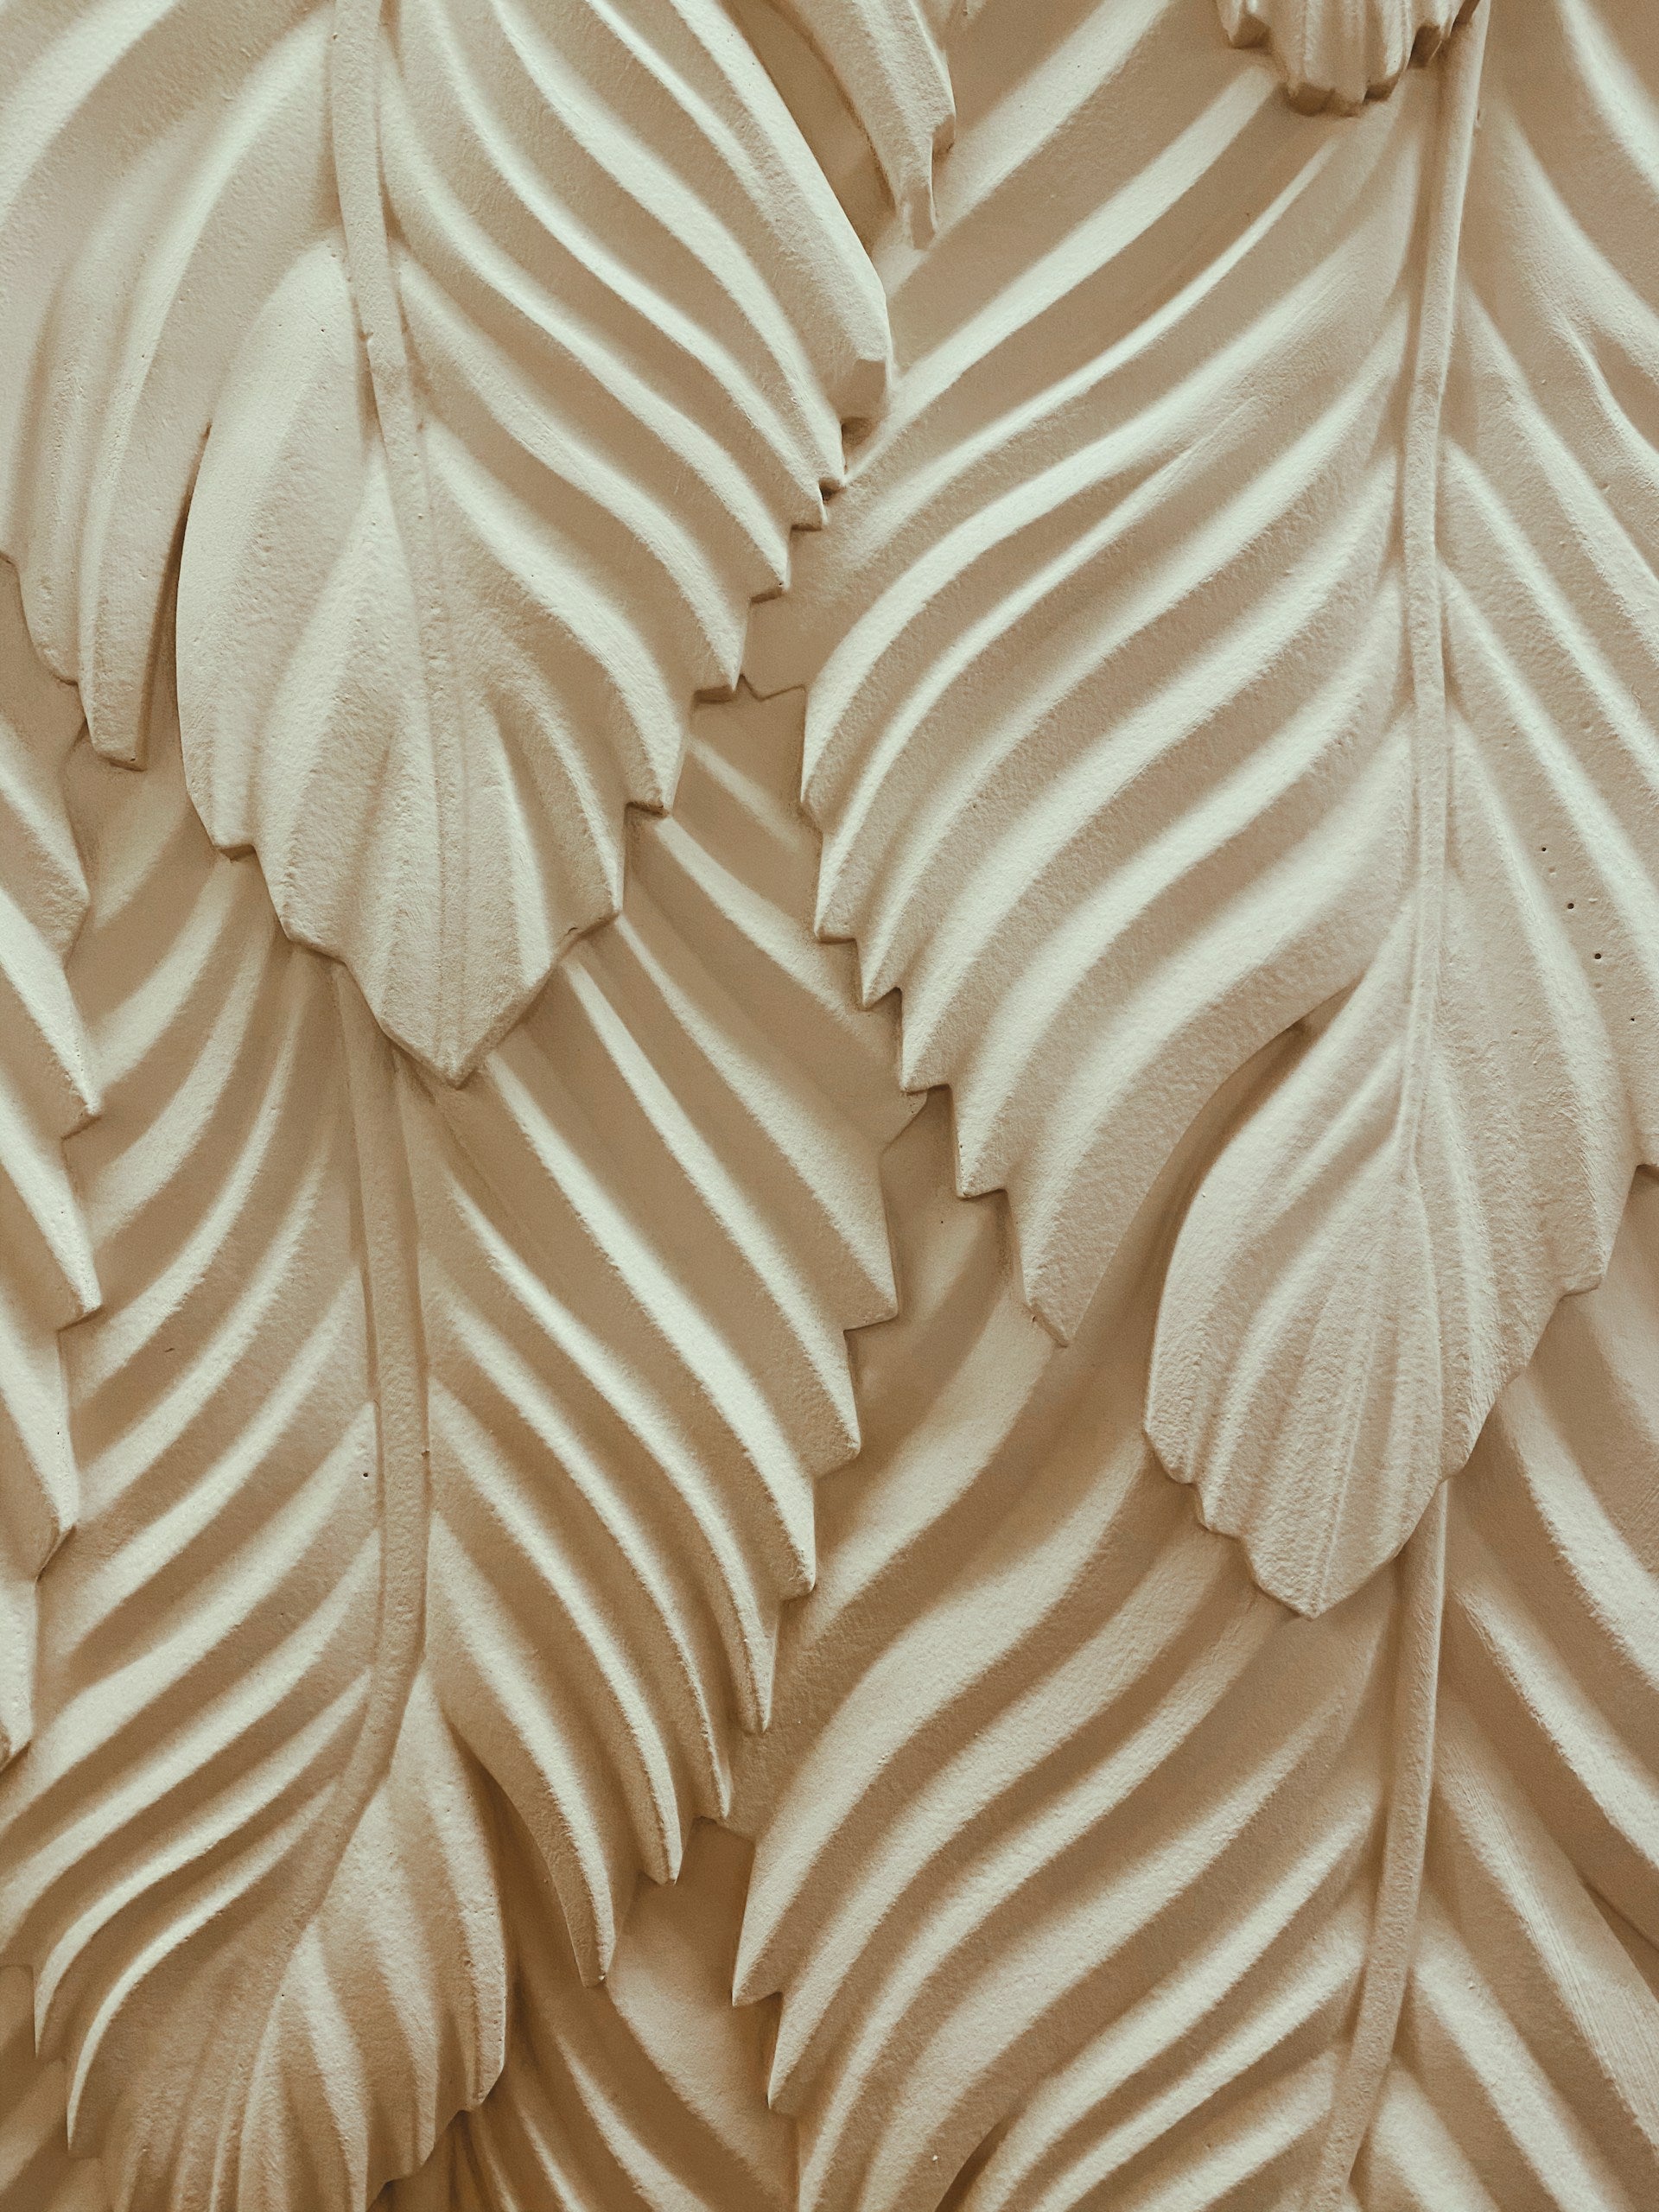 A close up of a cream decorative wall made out of leaves.